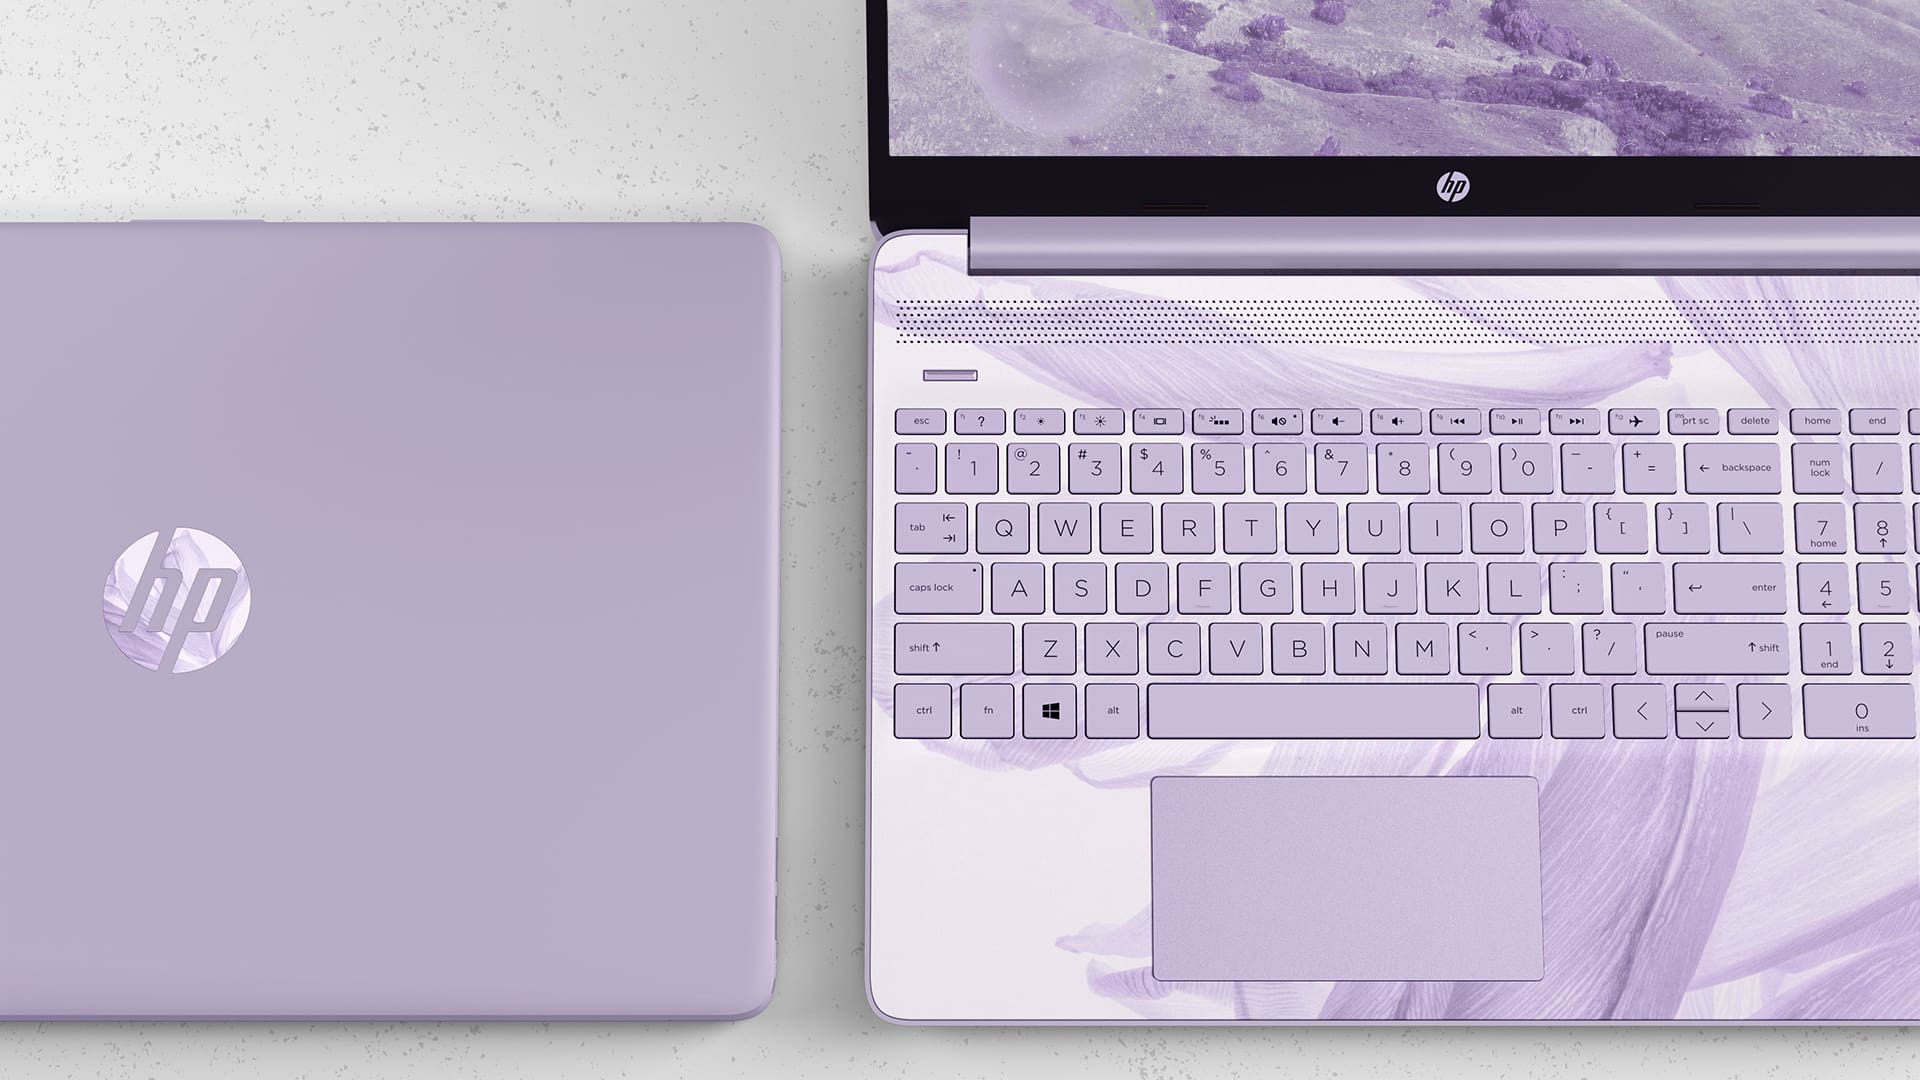 Photo of a lavender colored laptop with a marbled keyboard.